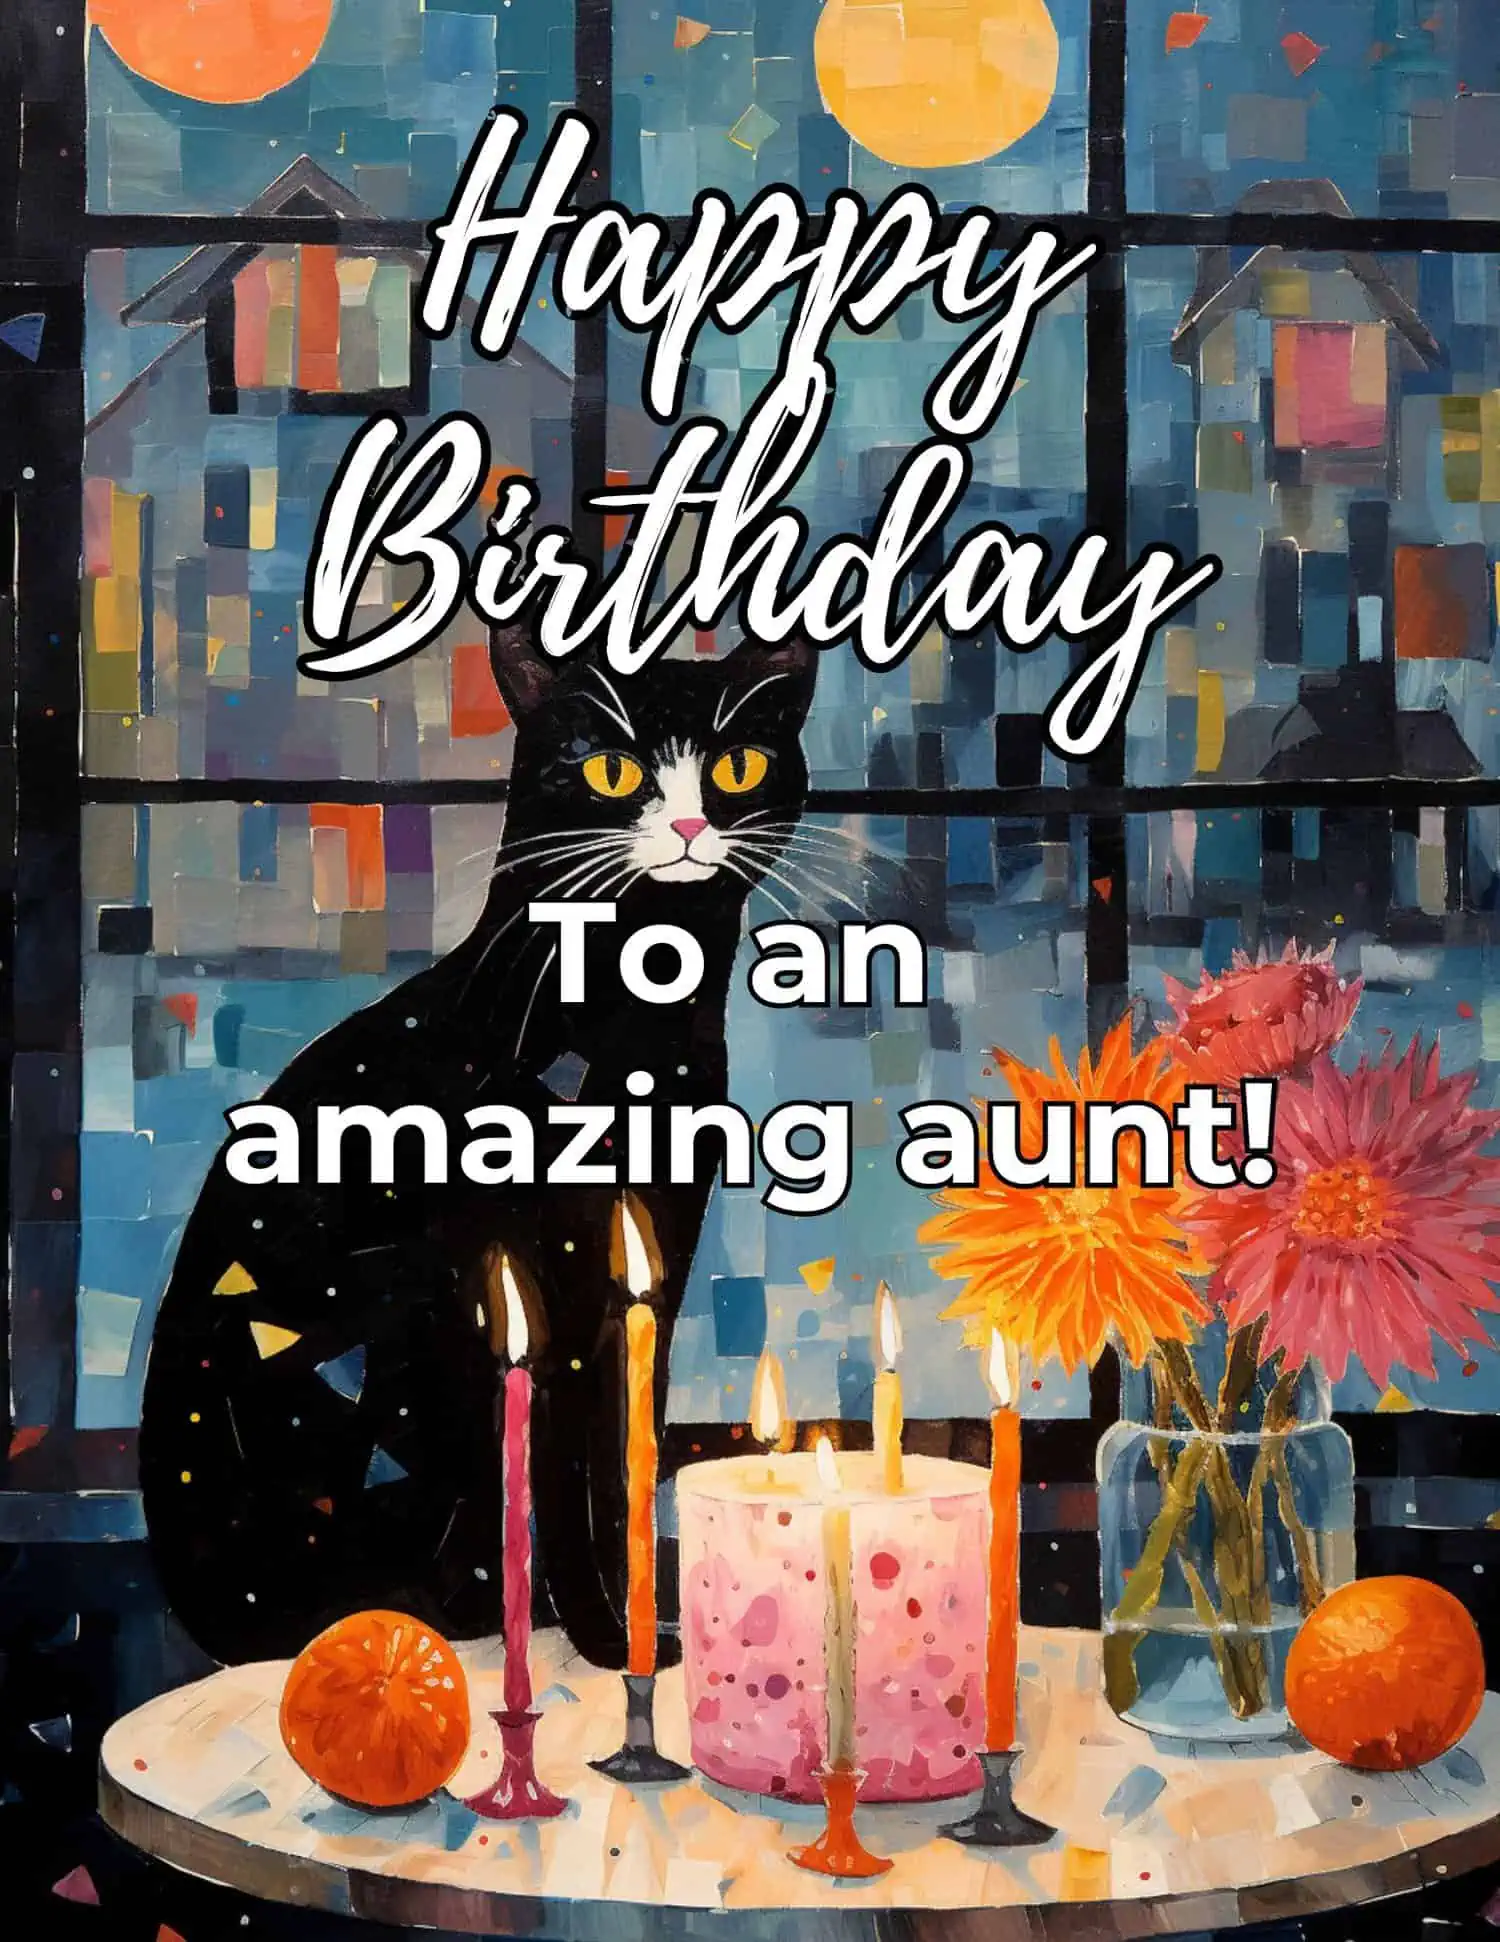 A selection of concise and heartfelt birthday messages tailored for aunts, ideal for expressing affection and appreciation in a few words.